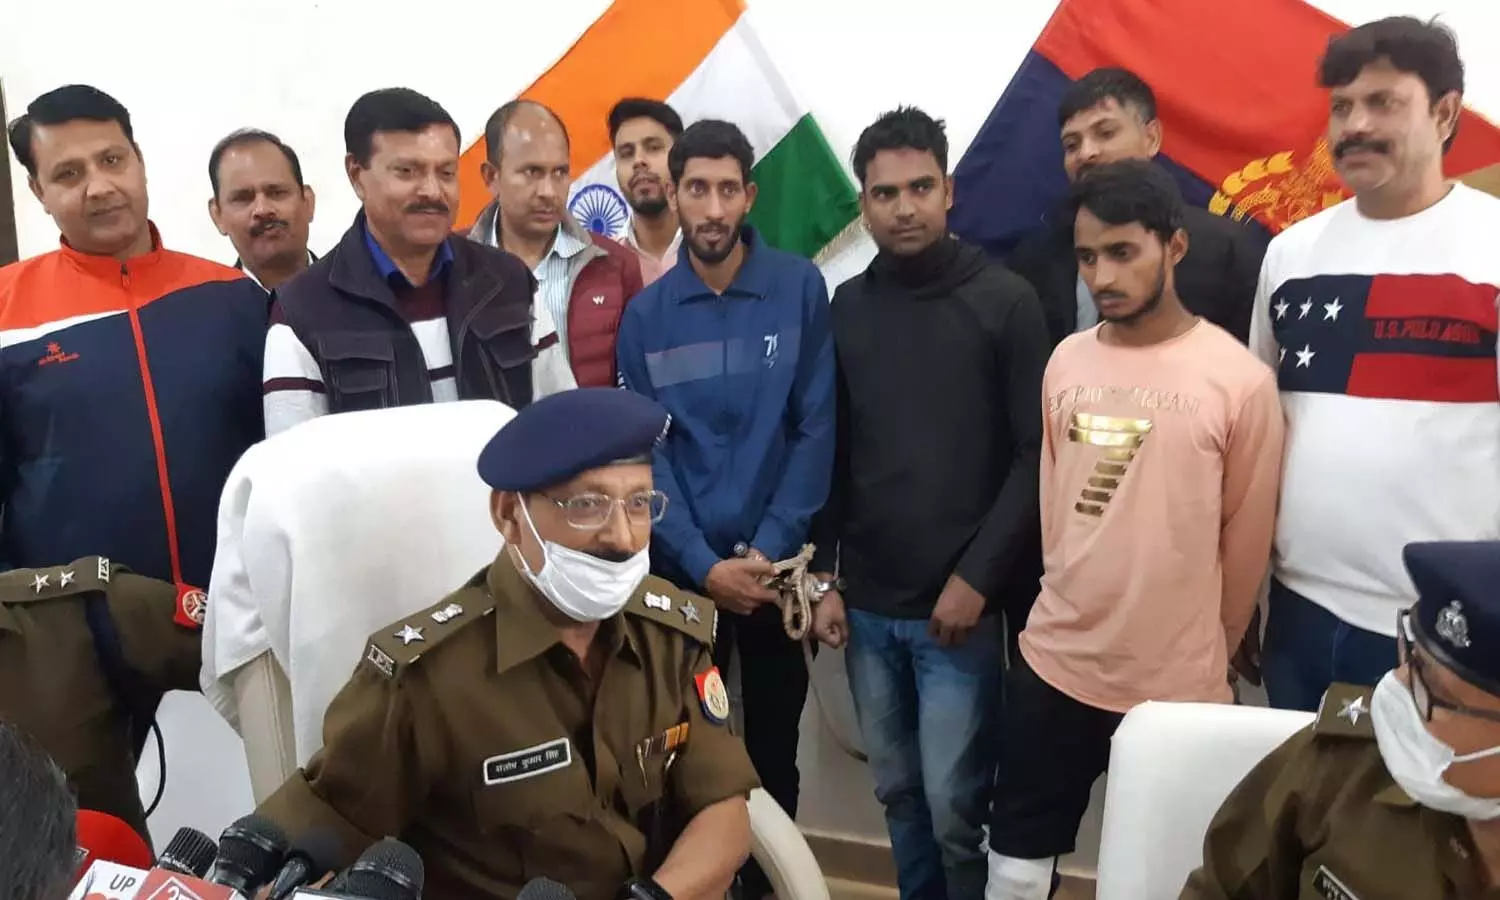 Bulandshahr Crime News: 3 prize shooters who opened fire on RLD leaders convoy arrested, car, 3 pistols, 11 cartridges recovered